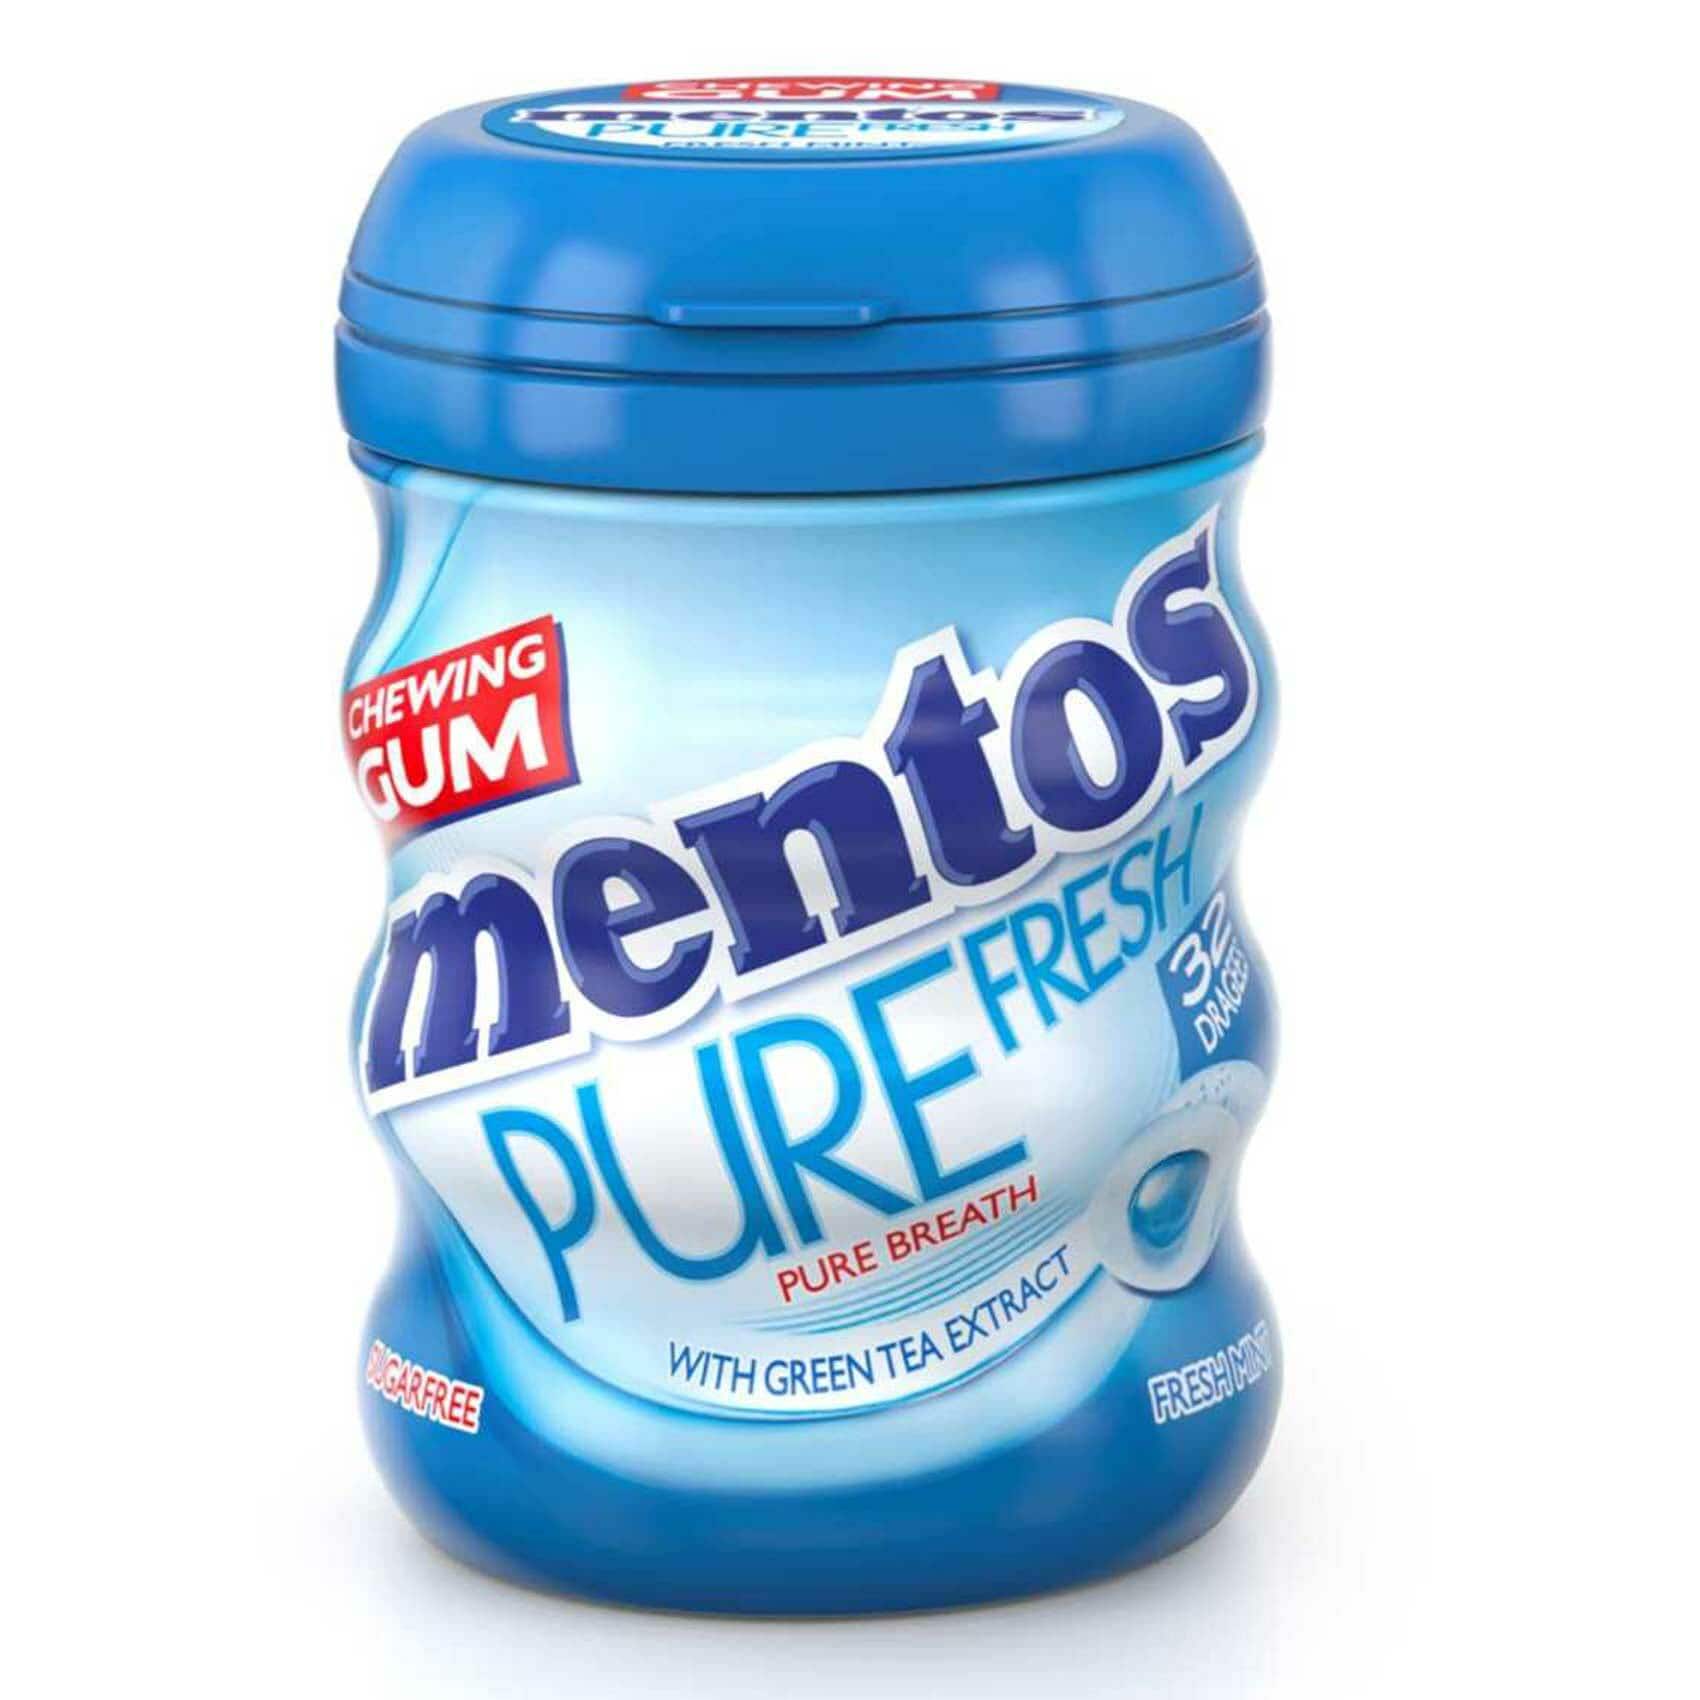 Buy Mentos Pure Fresh Mint Chewing Gum 56g Online Shop Food Cupboard On Carrefour Uae 0384